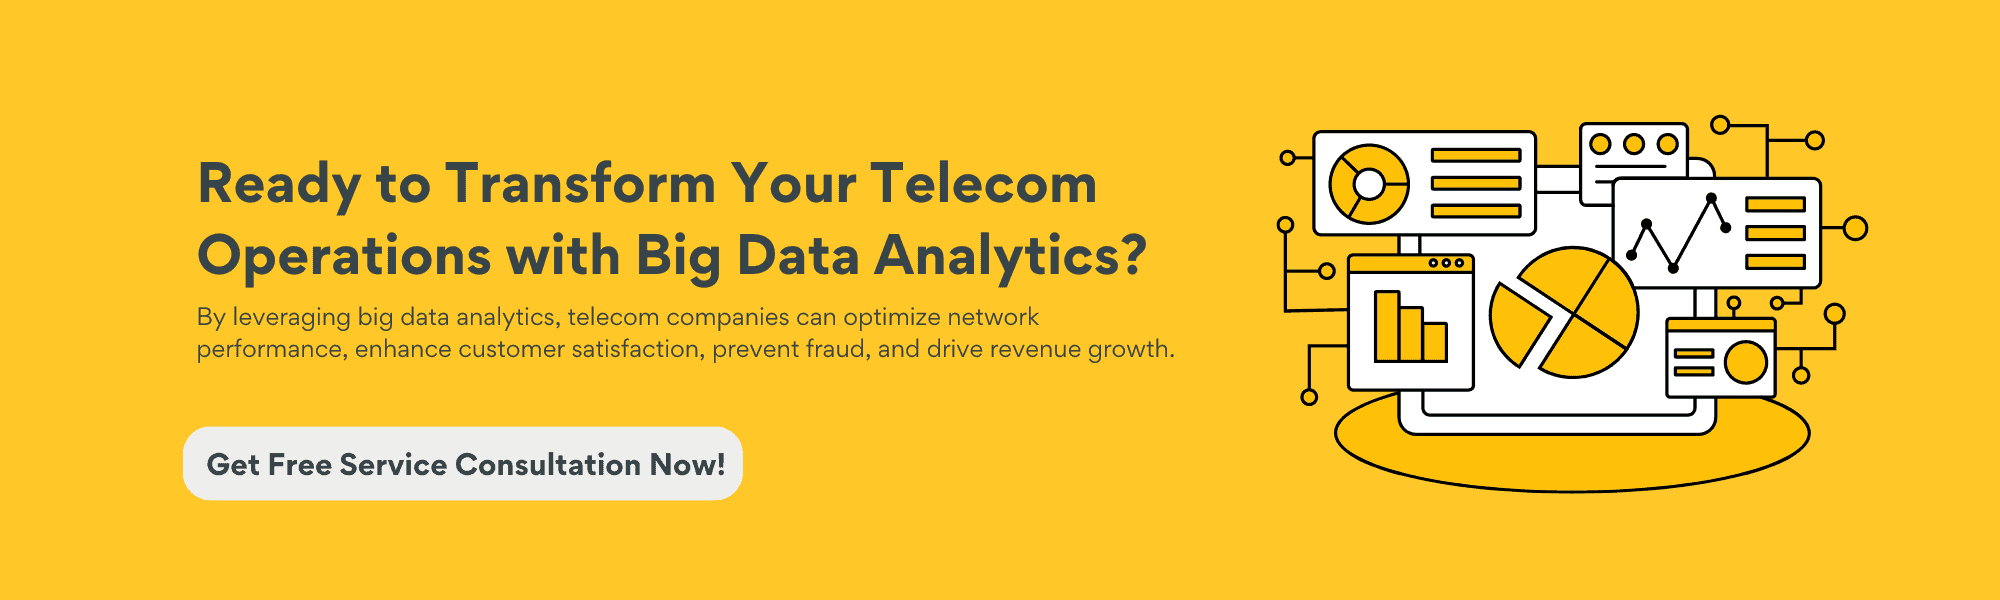 Ready to Transform Your Telecom Operations with Big Data Analytics